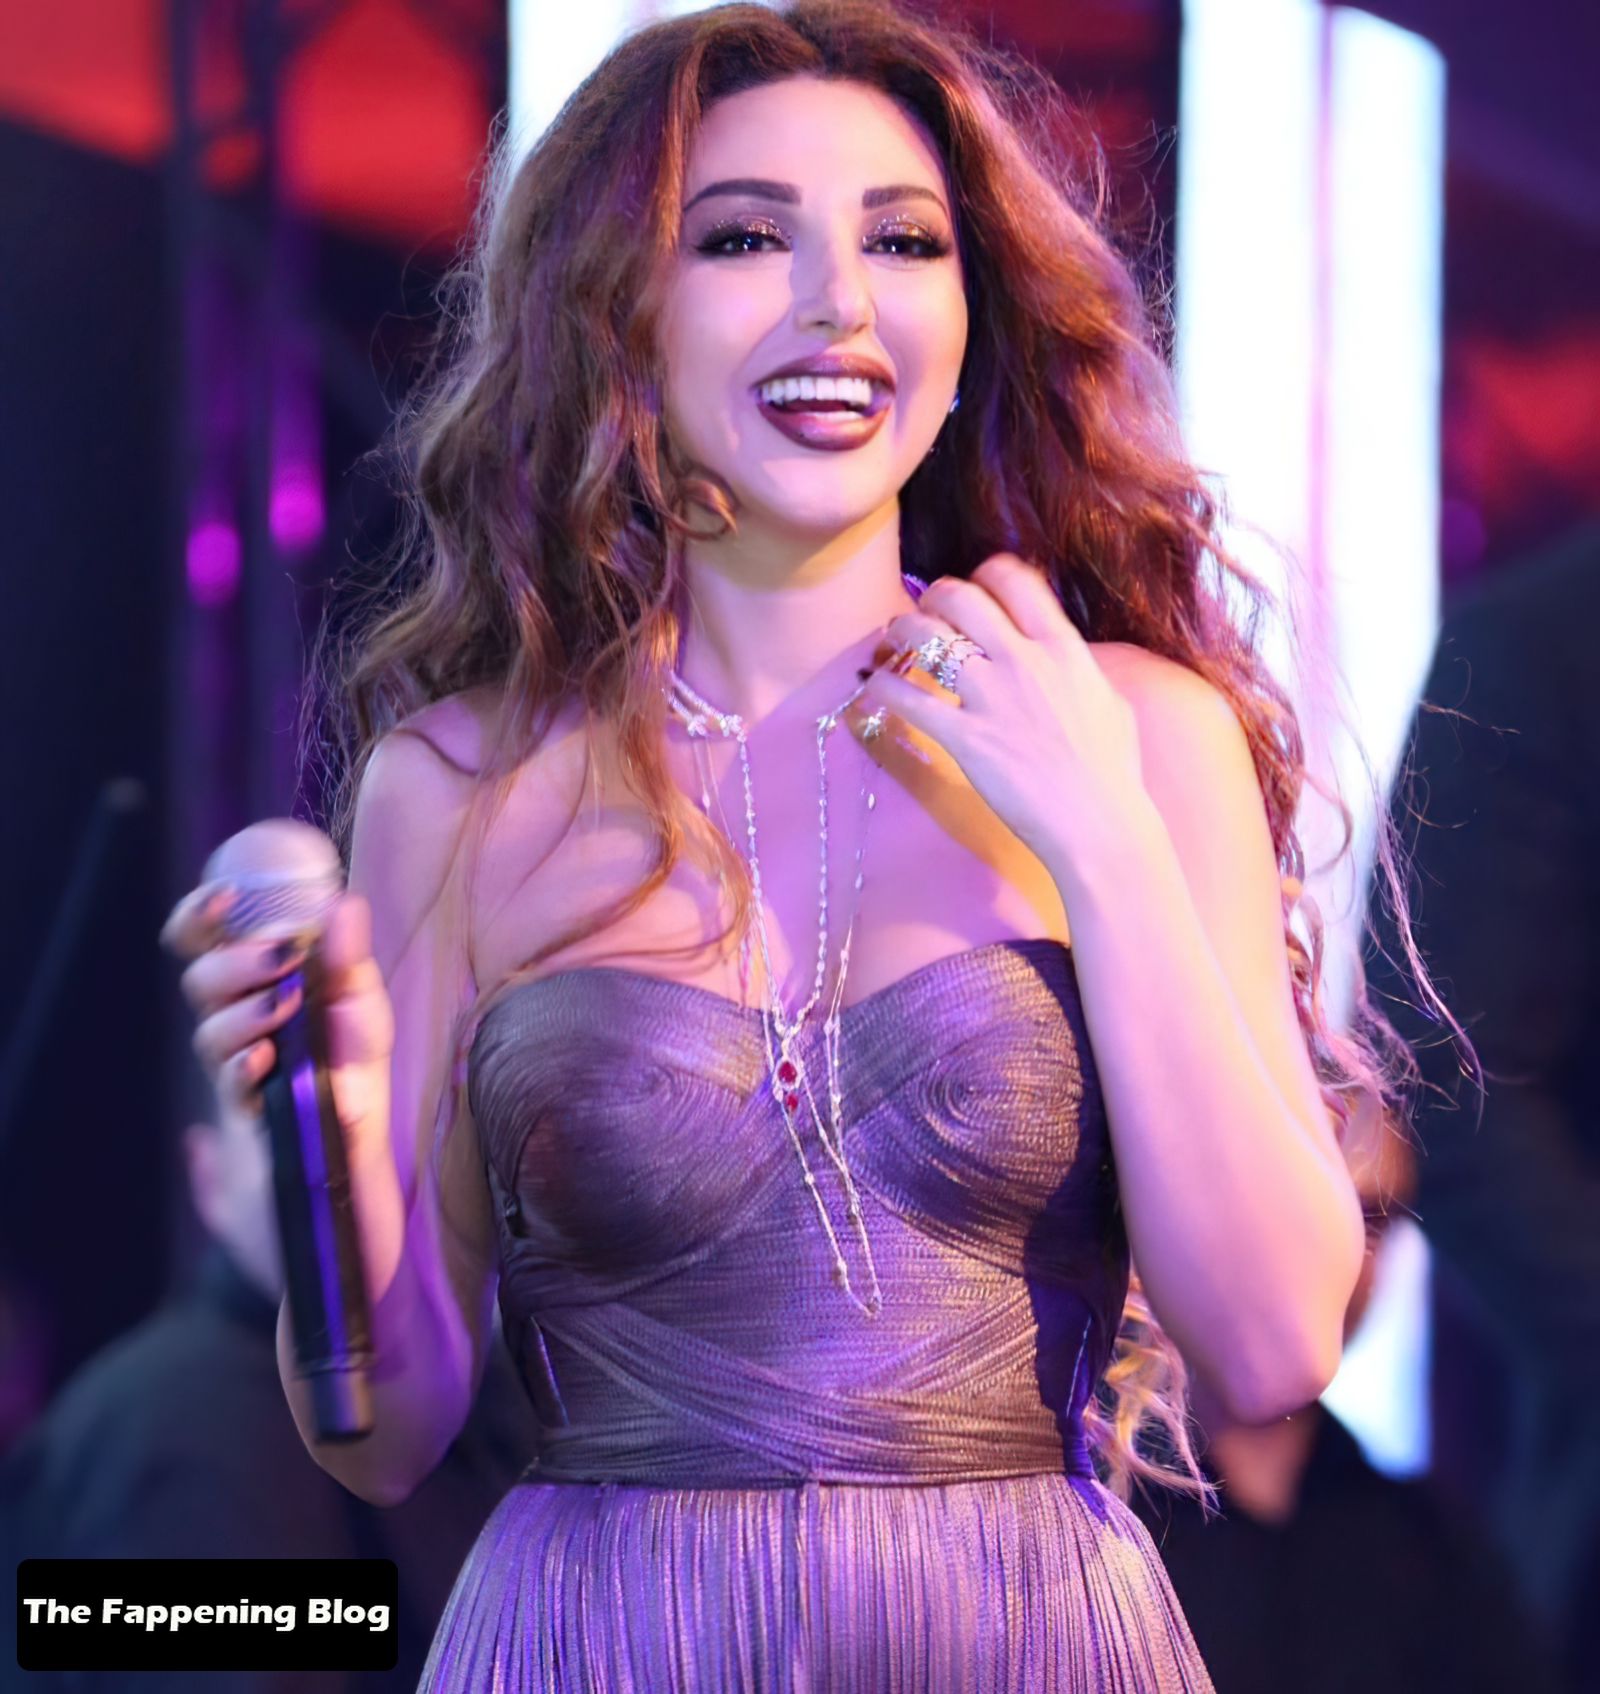 Myriam-Fares-Sexy-Collection-The-Fappening-Blog-19.jpg